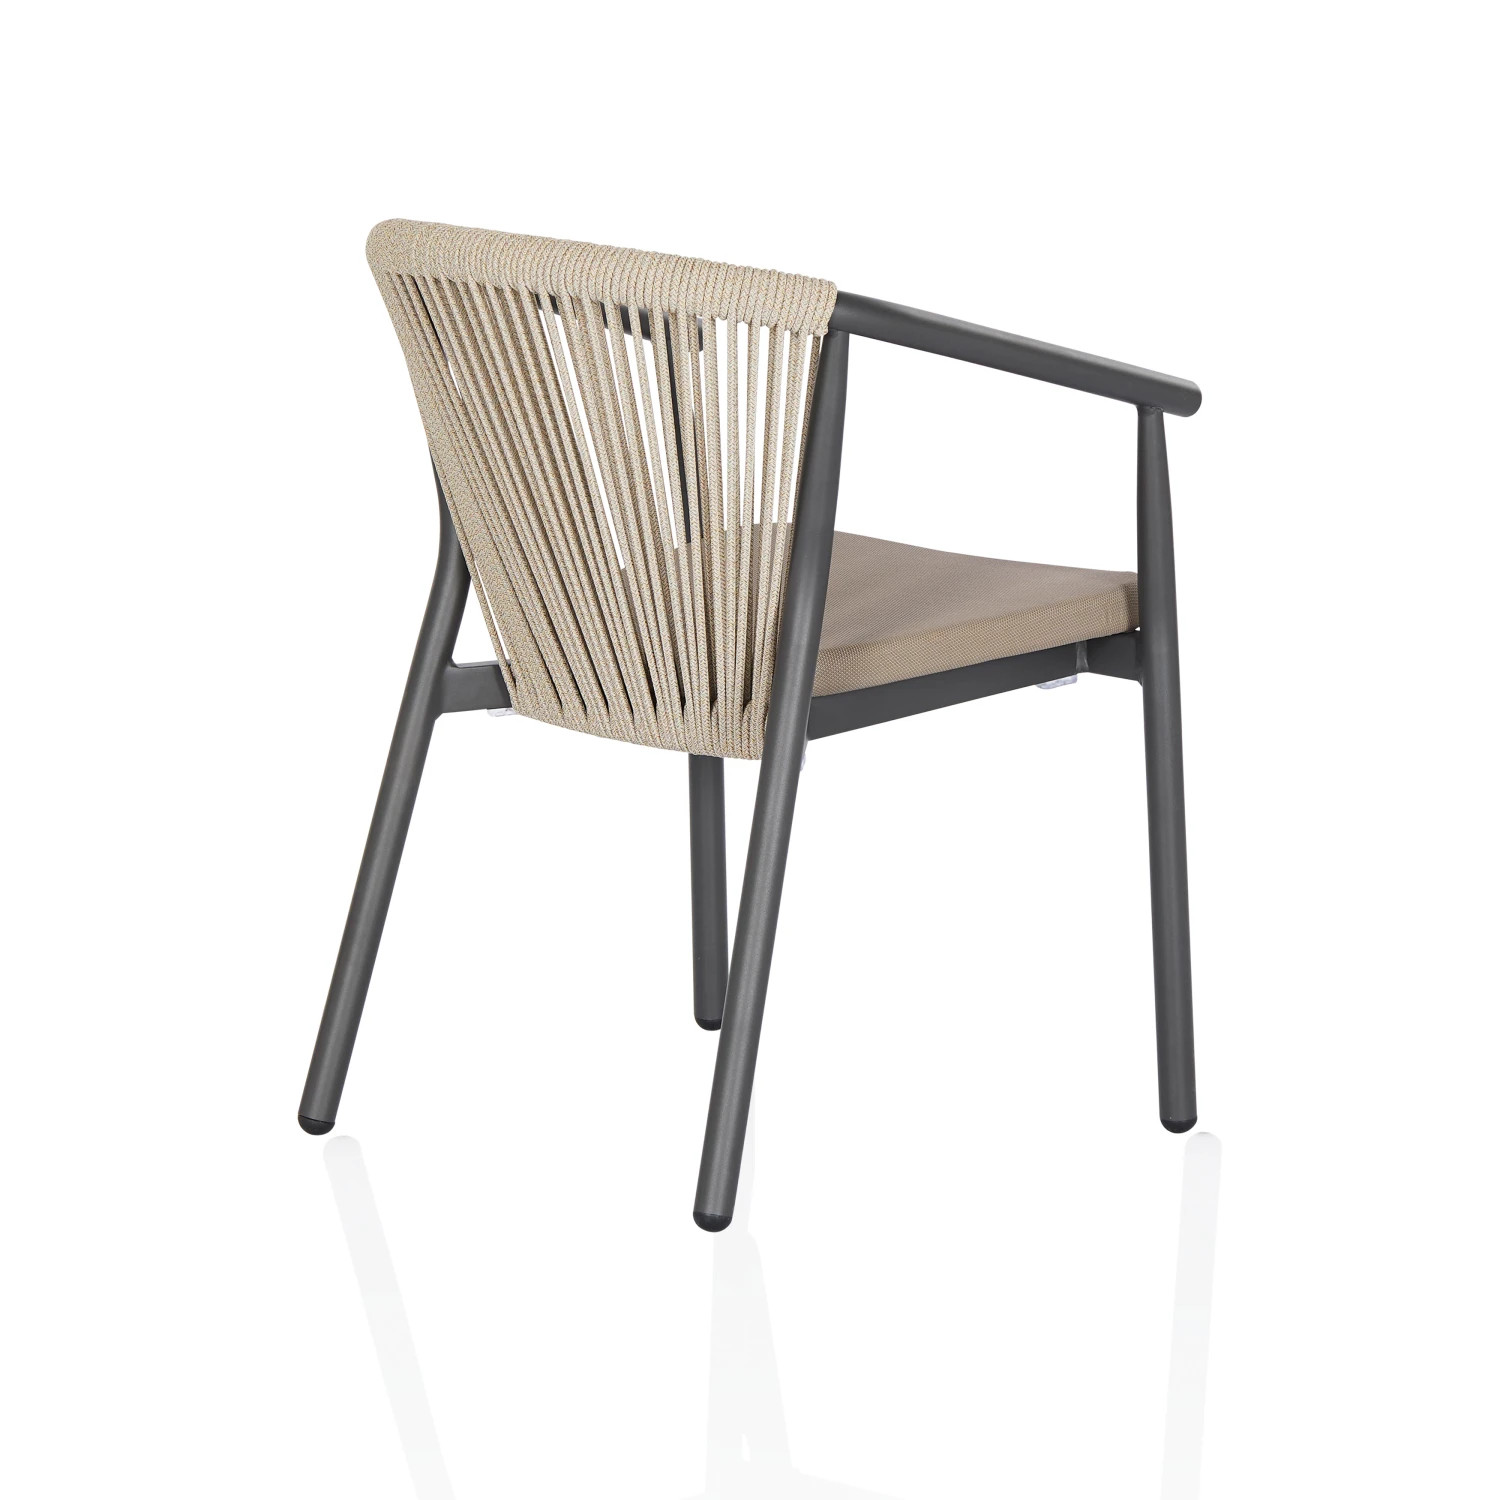 Marco Stackable Outdoor Dining Chair